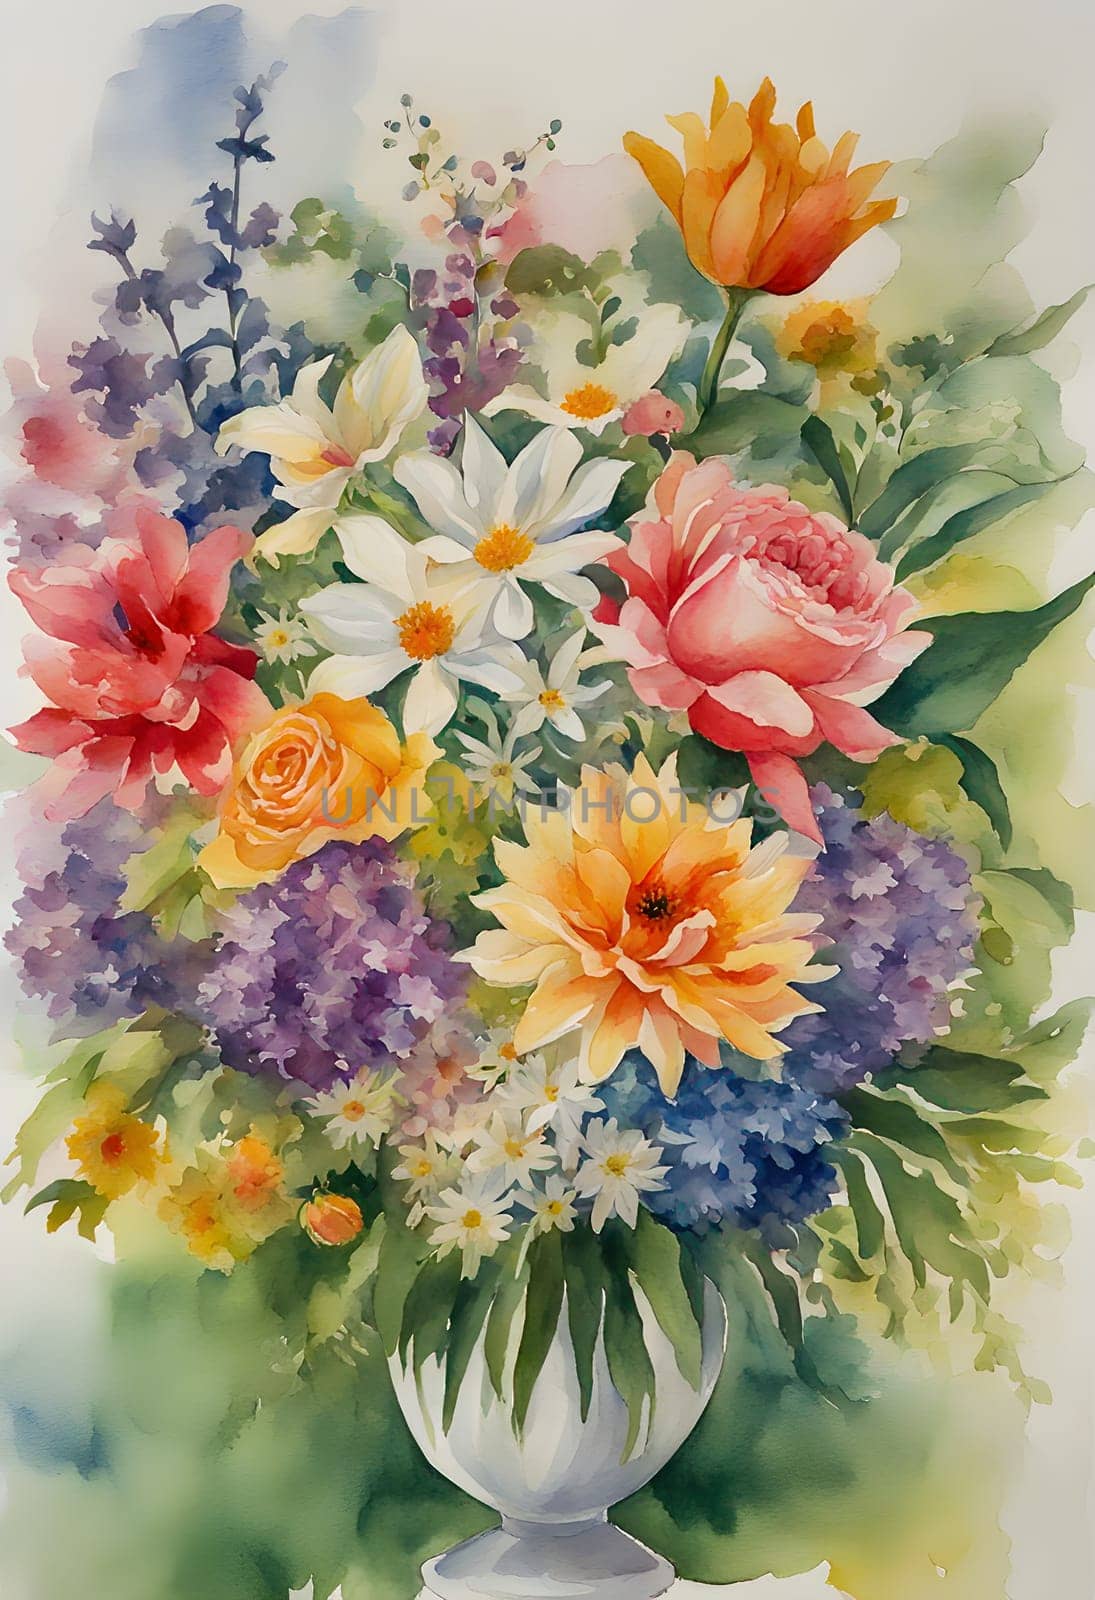 The image shows a watercolor painting of a bouquet of flowers on a white background. The bouquet is composed of different types of flowers, including roses, lilies, tulips and chrysanthemums. by rostik924